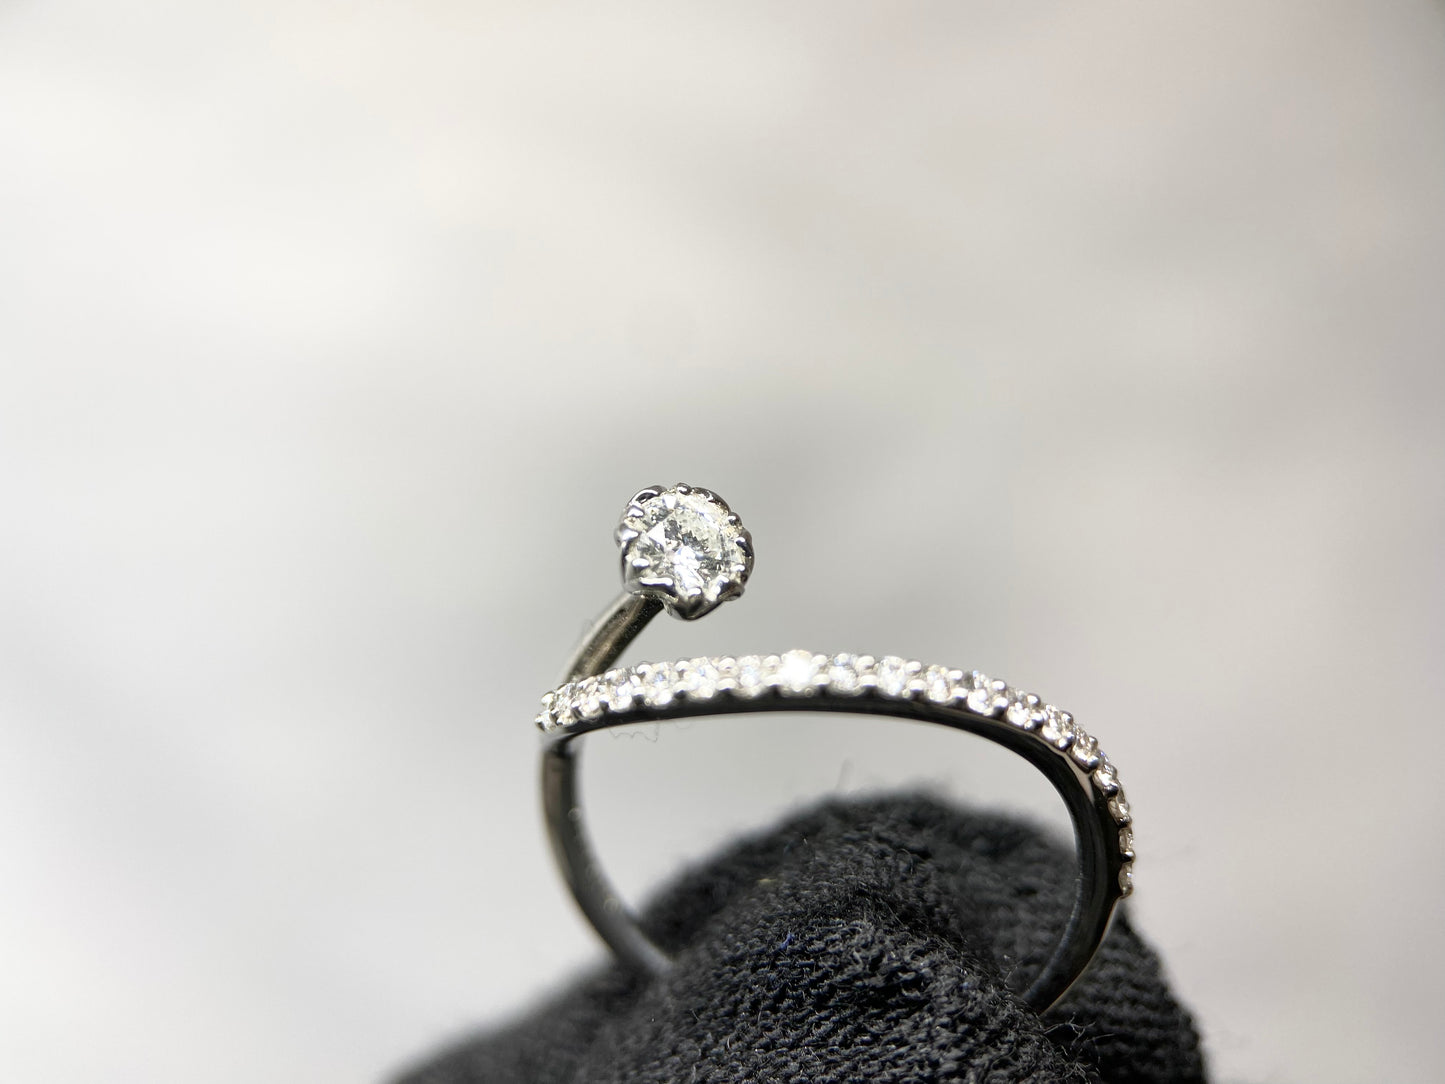 New] Diamond jewelry ring decorated with soon-to-be-blooming buds